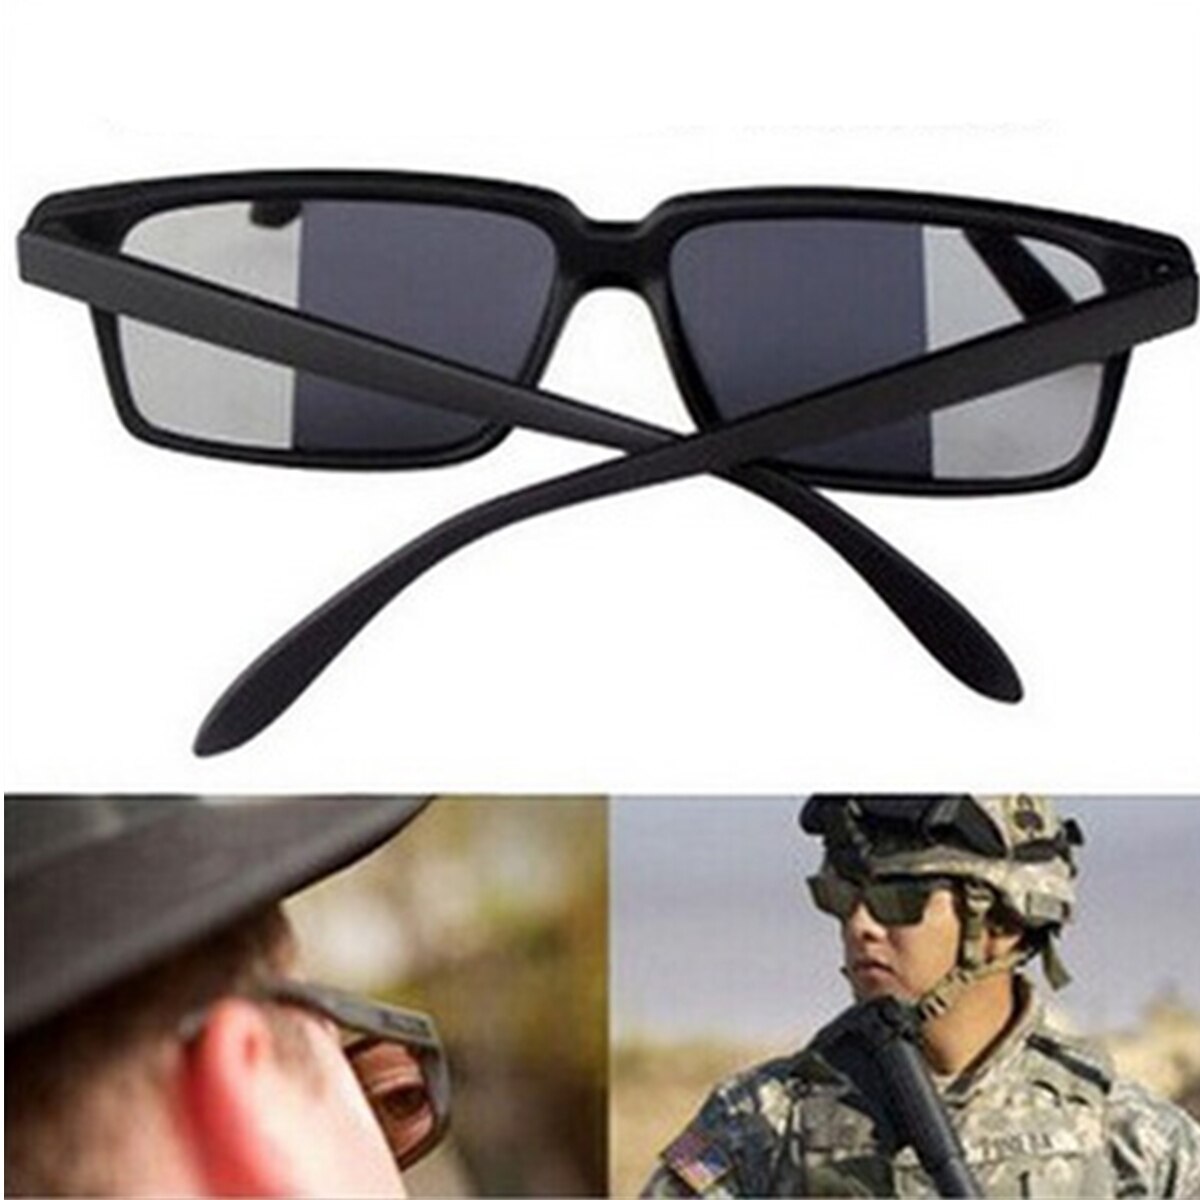 Spy Sunglasses. Like having eyes in the back of your head!